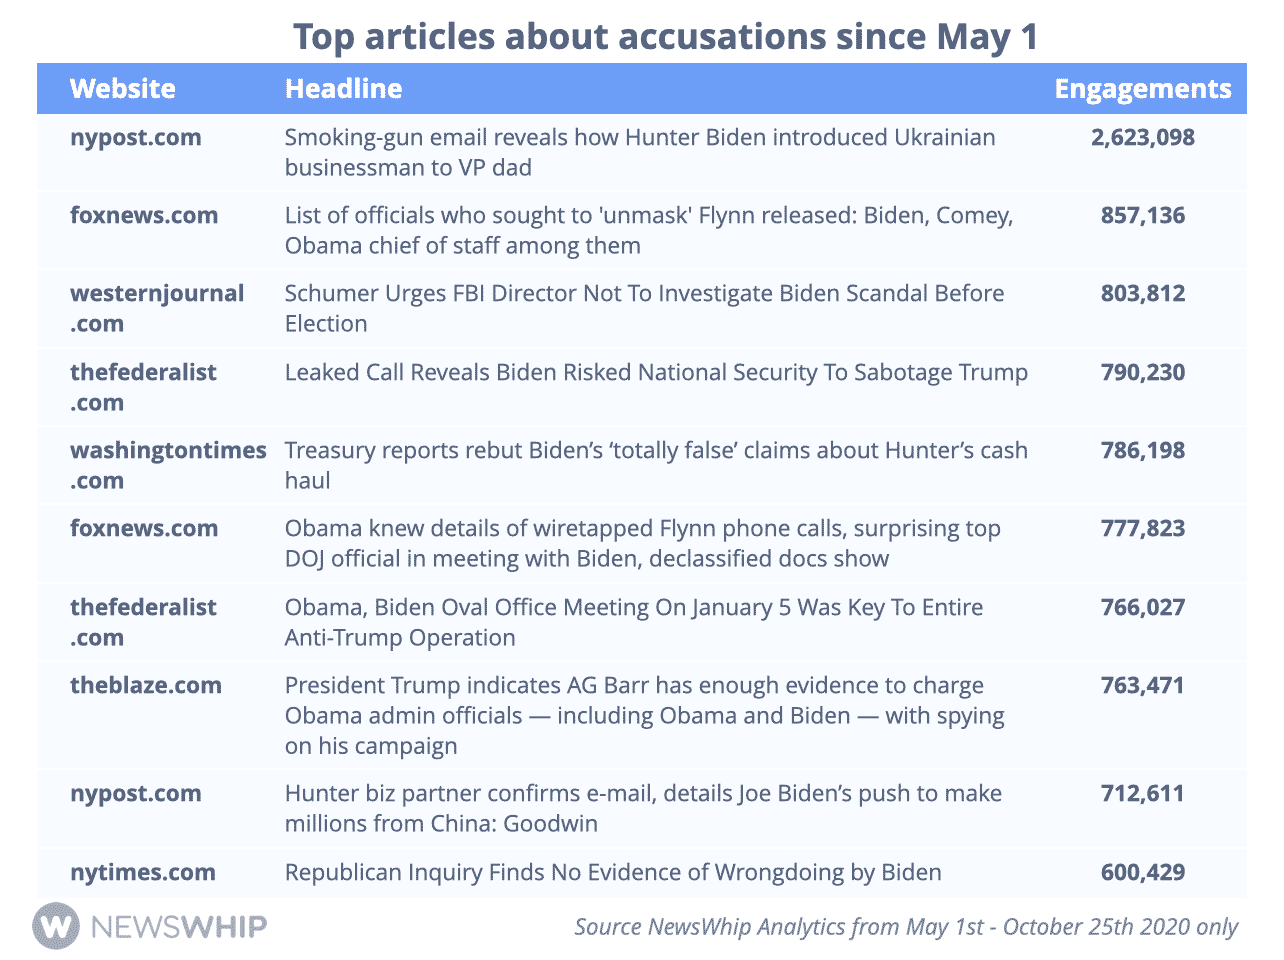 Chart showing the most engaged stories about Joe Biden accusations in 2020, ranked by engagement